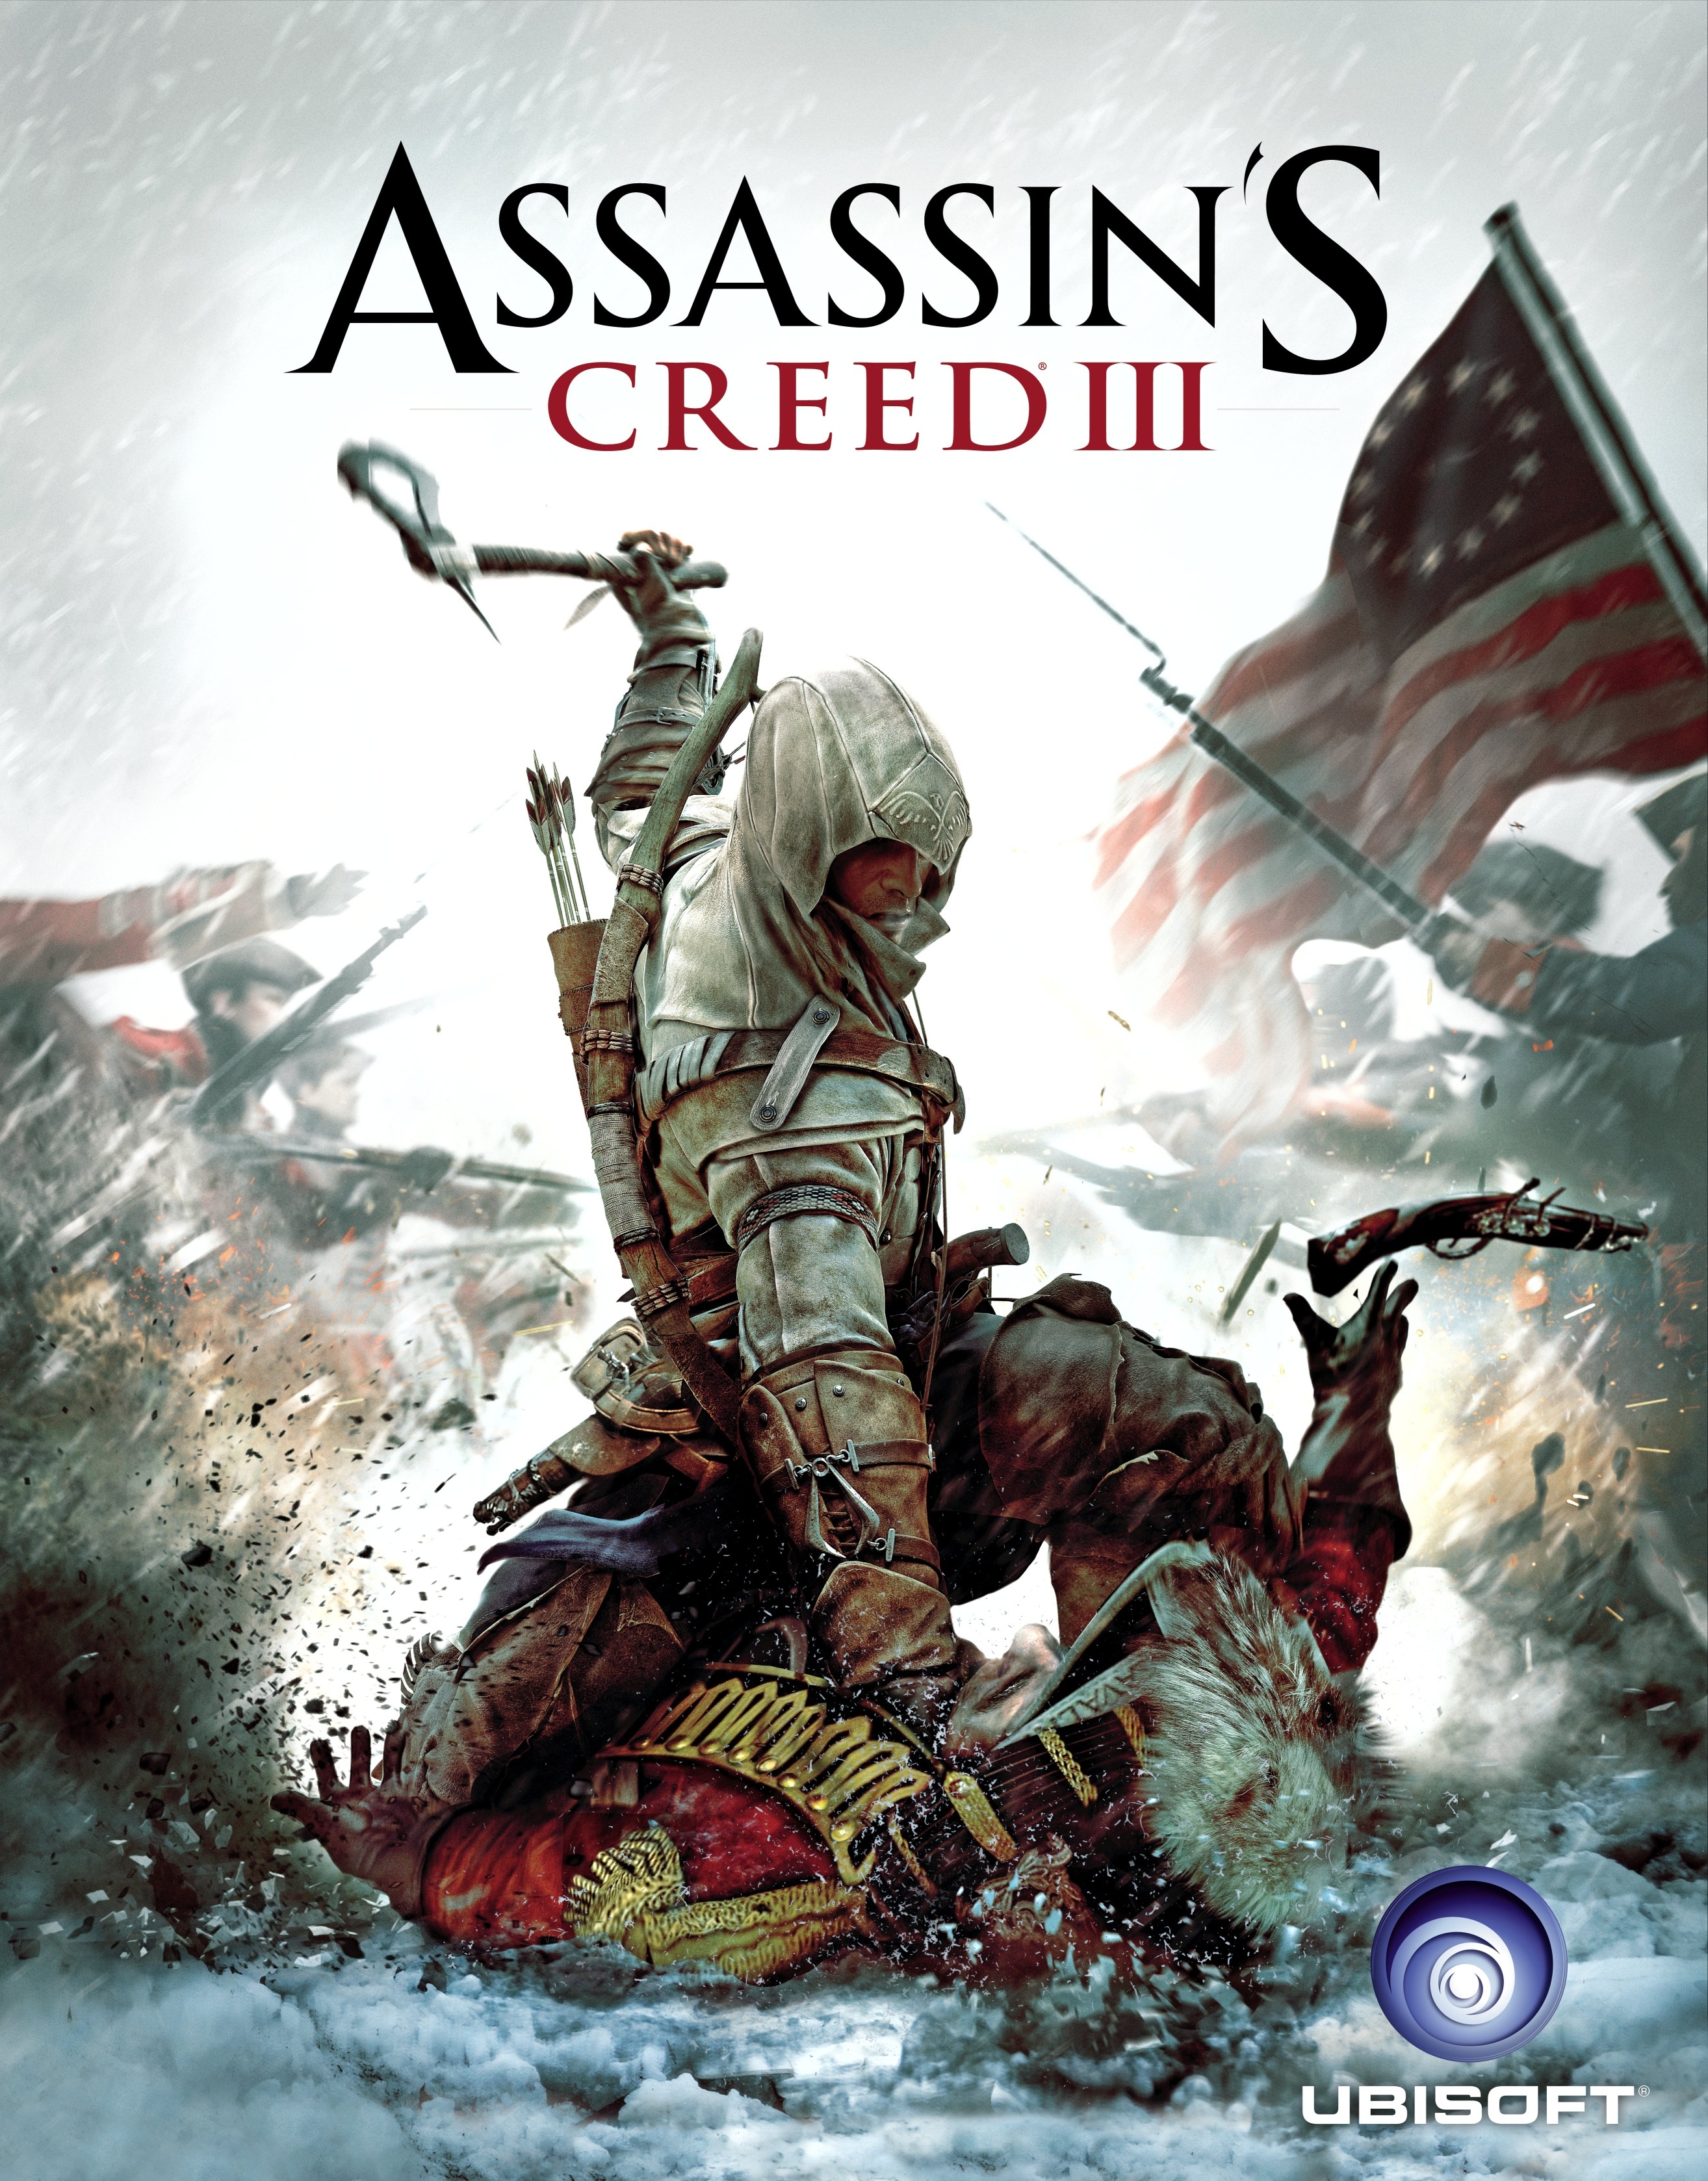 assassin's creed 3 pc game free download